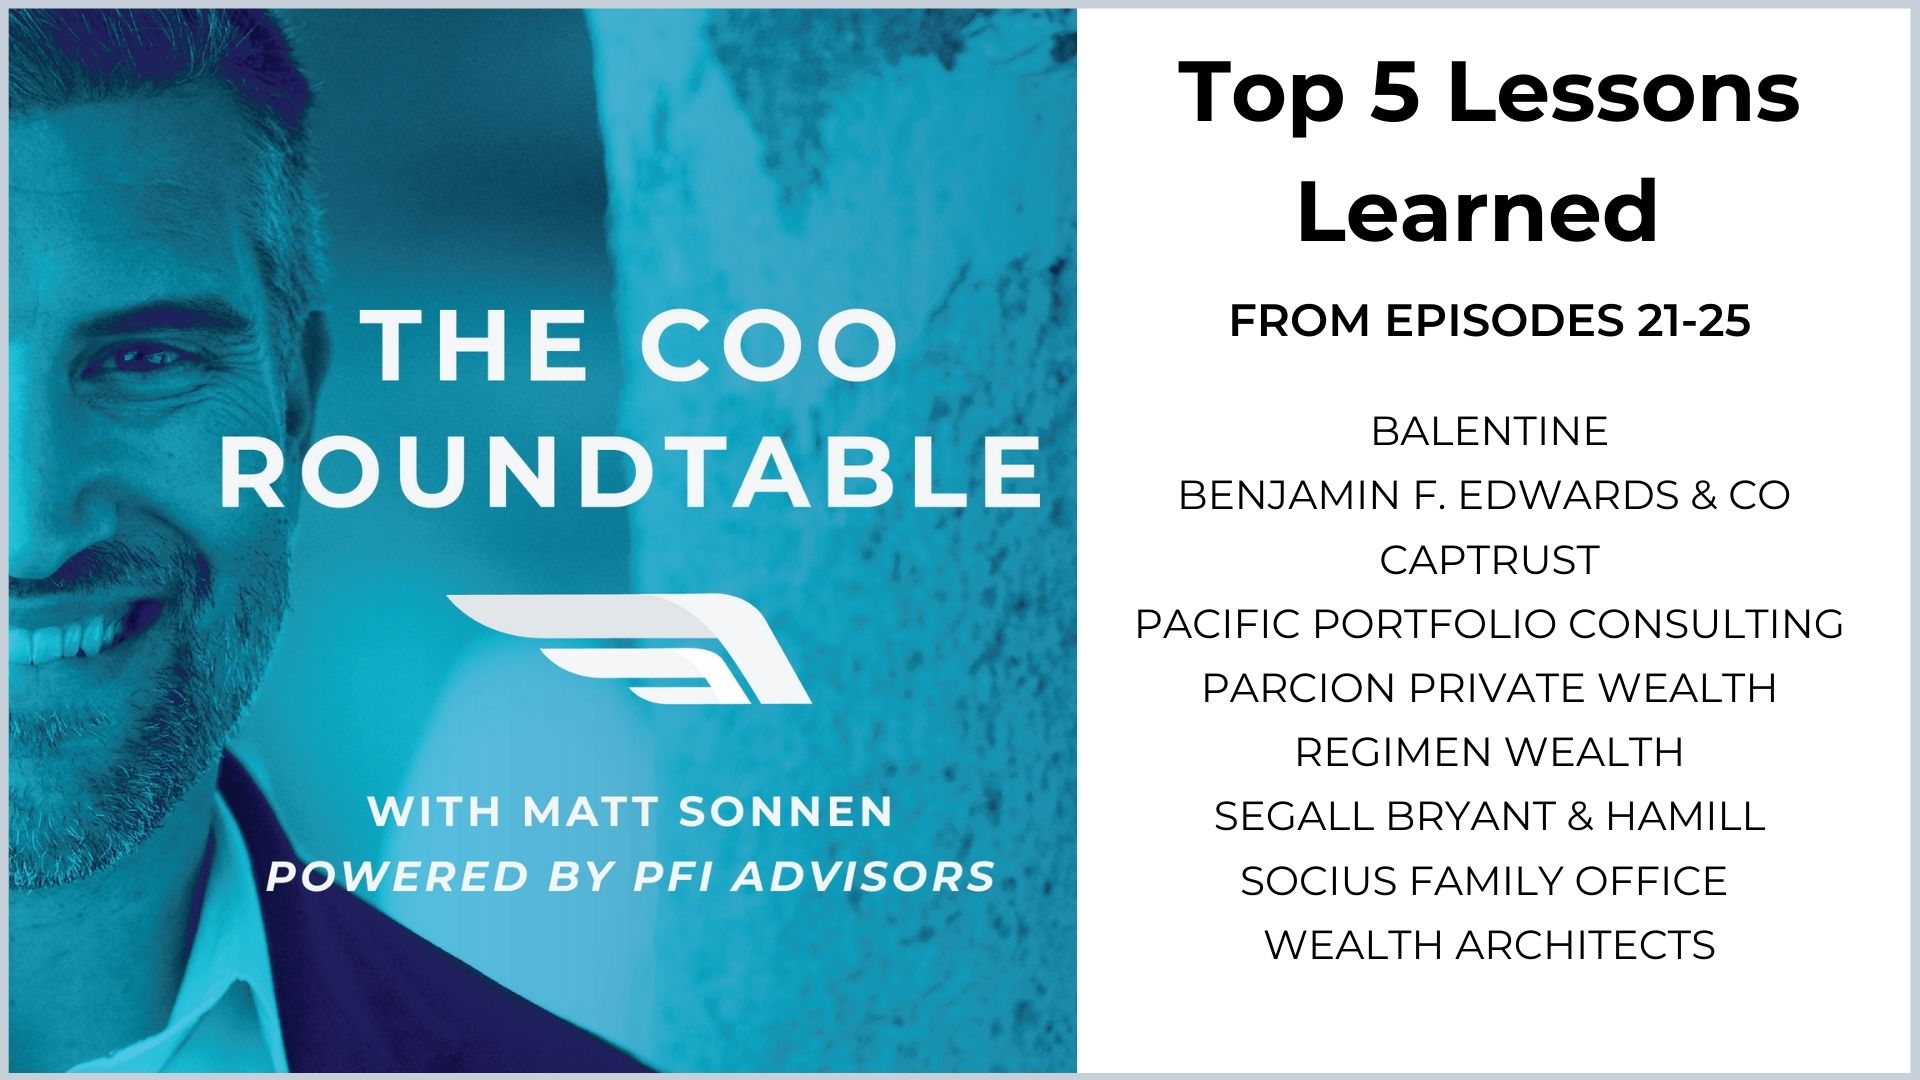 Top 5 Lessons Learned from Episodes  21-25 of The COO Roundtable